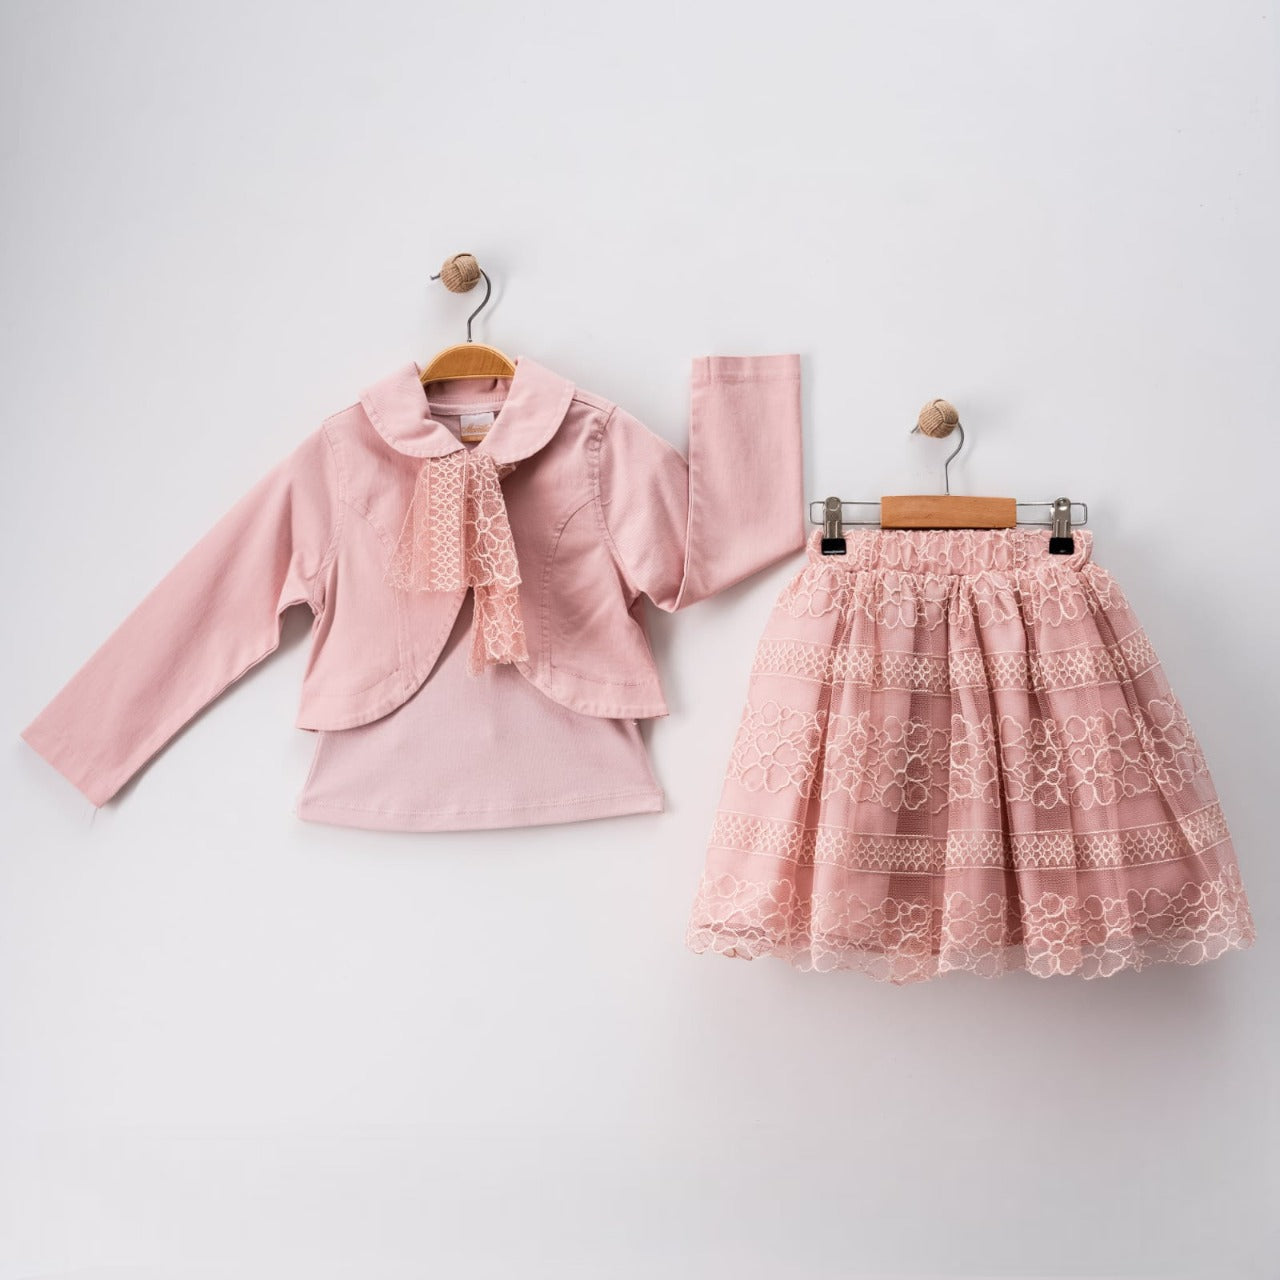 The Dazzling One Girls Casual Set